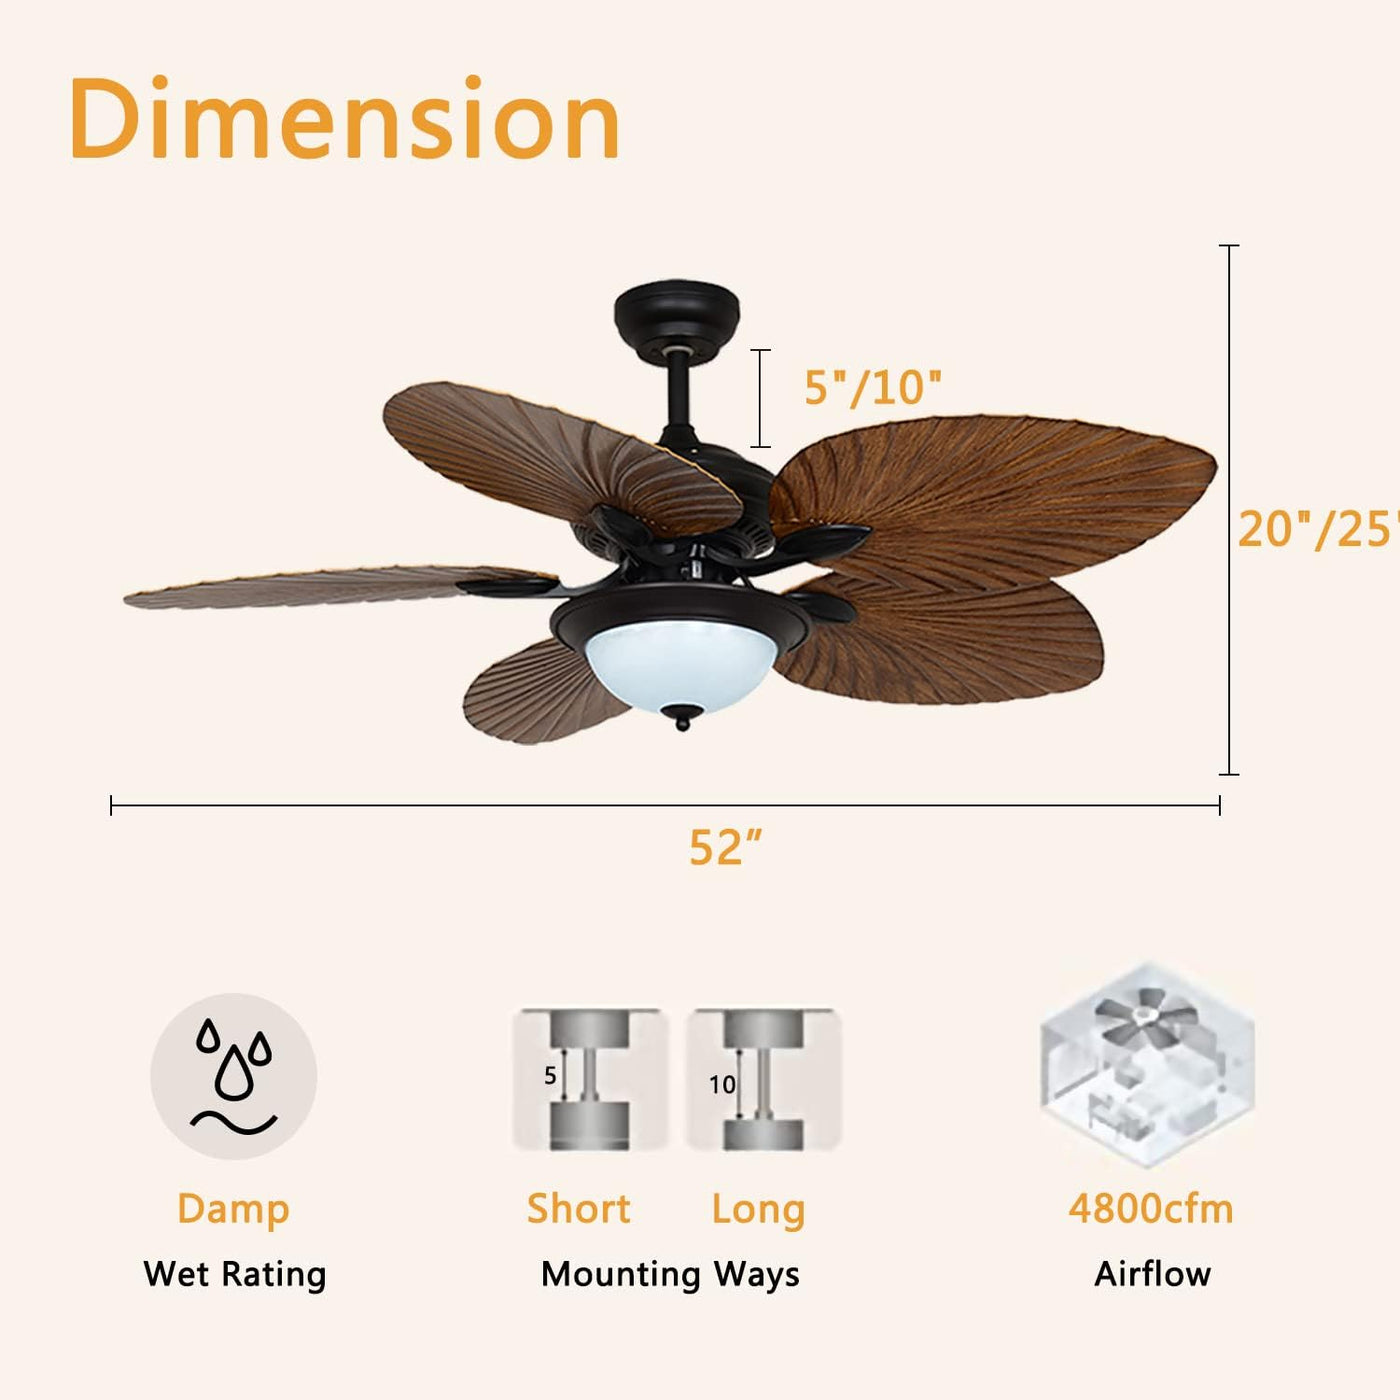 Whmetal cover Tropical Ceiling Fans with Lights - $125